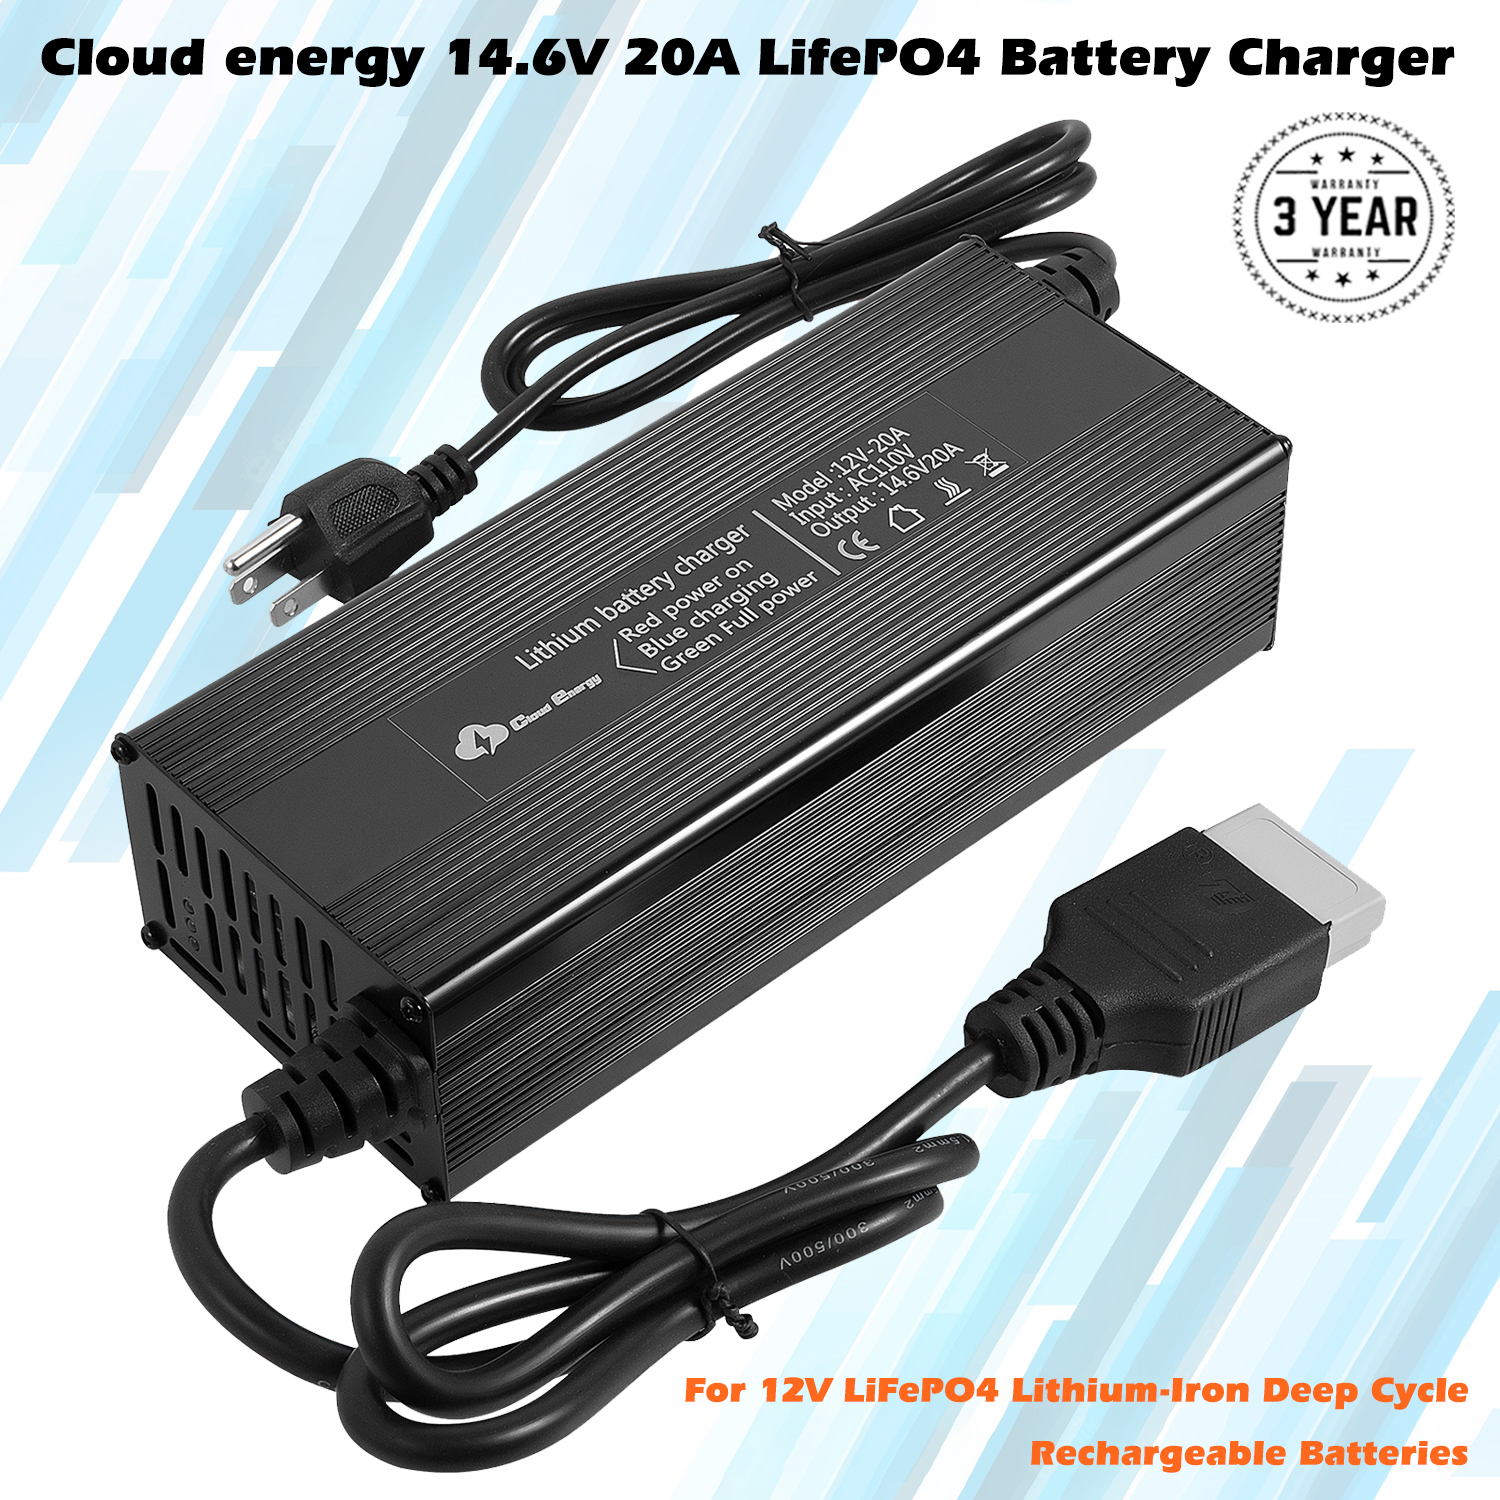 B2B Fast Charging 14.6V 20A LiFePO4 Battery Charger for 12V Batteries